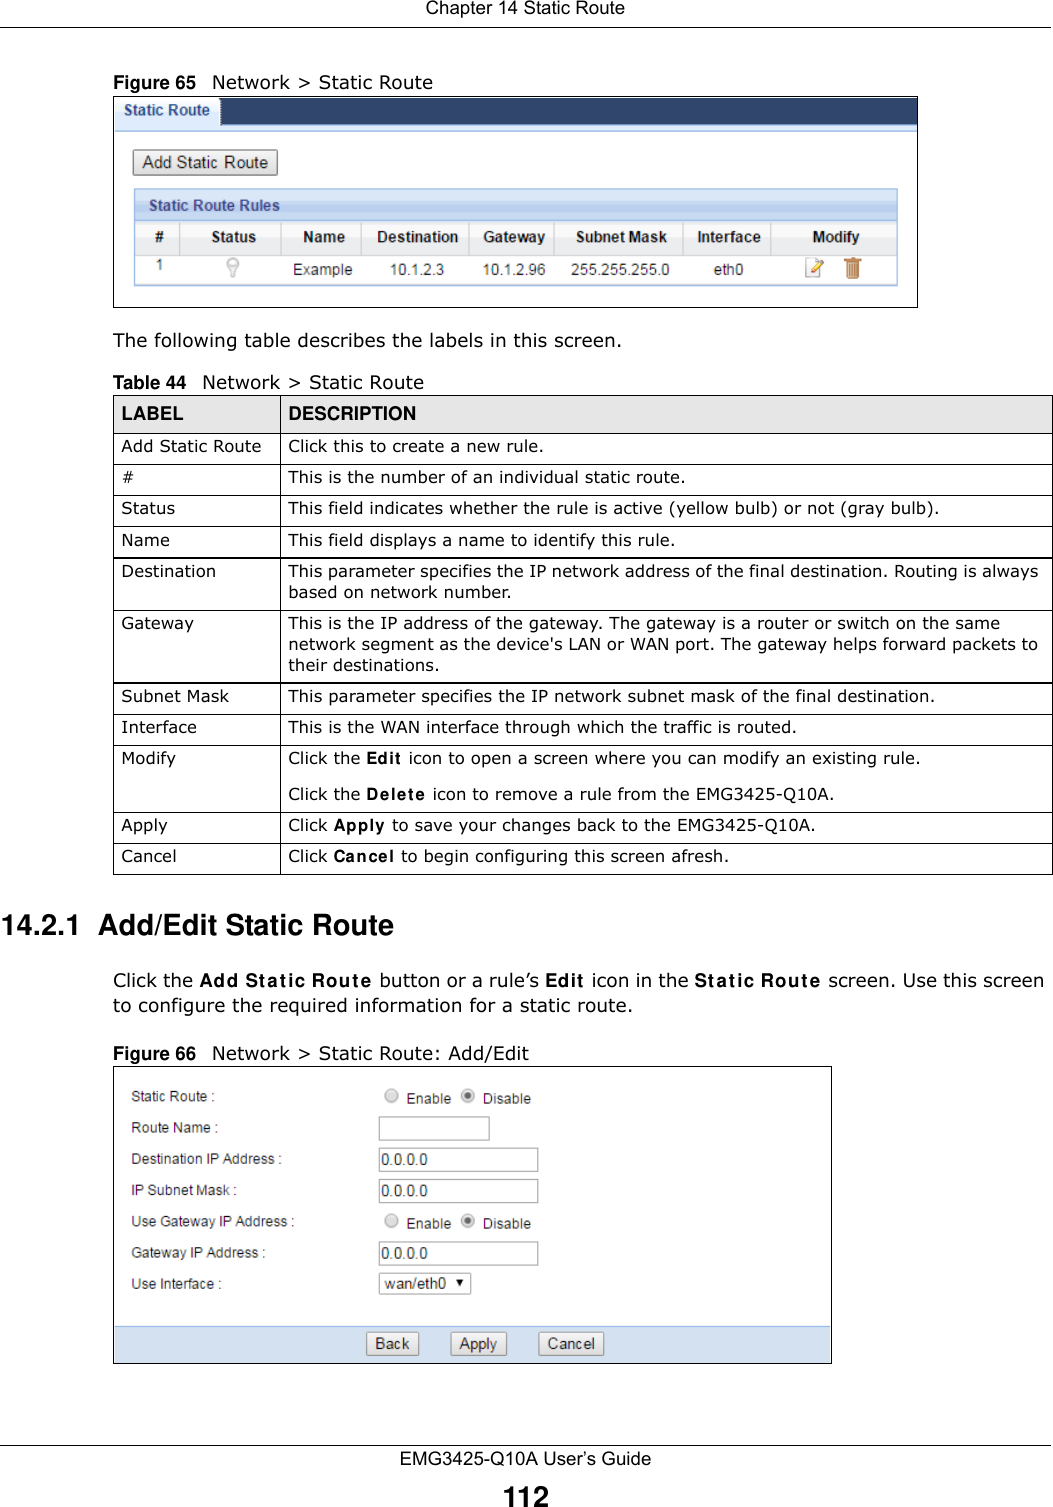 Chapter 14 Static RouteEMG3425-Q10A User’s Guide112Figure 65   Network &gt; Static RouteThe following table describes the labels in this screen. 14.2.1  Add/Edit Static Route  Click the Add Sta tic Rout e button or a rule’s Ed it  icon in the Sta t ic Rout e screen. Use this screen to configure the required information for a static route. Figure 66   Network &gt; Static Route: Add/Edit Table 44   Network &gt; Static RouteLABEL DESCRIPTIONAdd Static Route Click this to create a new rule.#This is the number of an individual static route.Status This field indicates whether the rule is active (yellow bulb) or not (gray bulb).Name This field displays a name to identify this rule.Destination This parameter specifies the IP network address of the final destination. Routing is always based on network number. Gateway This is the IP address of the gateway. The gateway is a router or switch on the same network segment as the device&apos;s LAN or WAN port. The gateway helps forward packets to their destinations.Subnet Mask This parameter specifies the IP network subnet mask of the final destination.Interface This is the WAN interface through which the traffic is routed. Modify Click the Ed it  icon to open a screen where you can modify an existing rule. Click the Delete icon to remove a rule from the EMG3425-Q10A.Apply Click Apply  to save your changes back to the EMG3425-Q10A.Cancel Click Cancel to begin configuring this screen afresh.